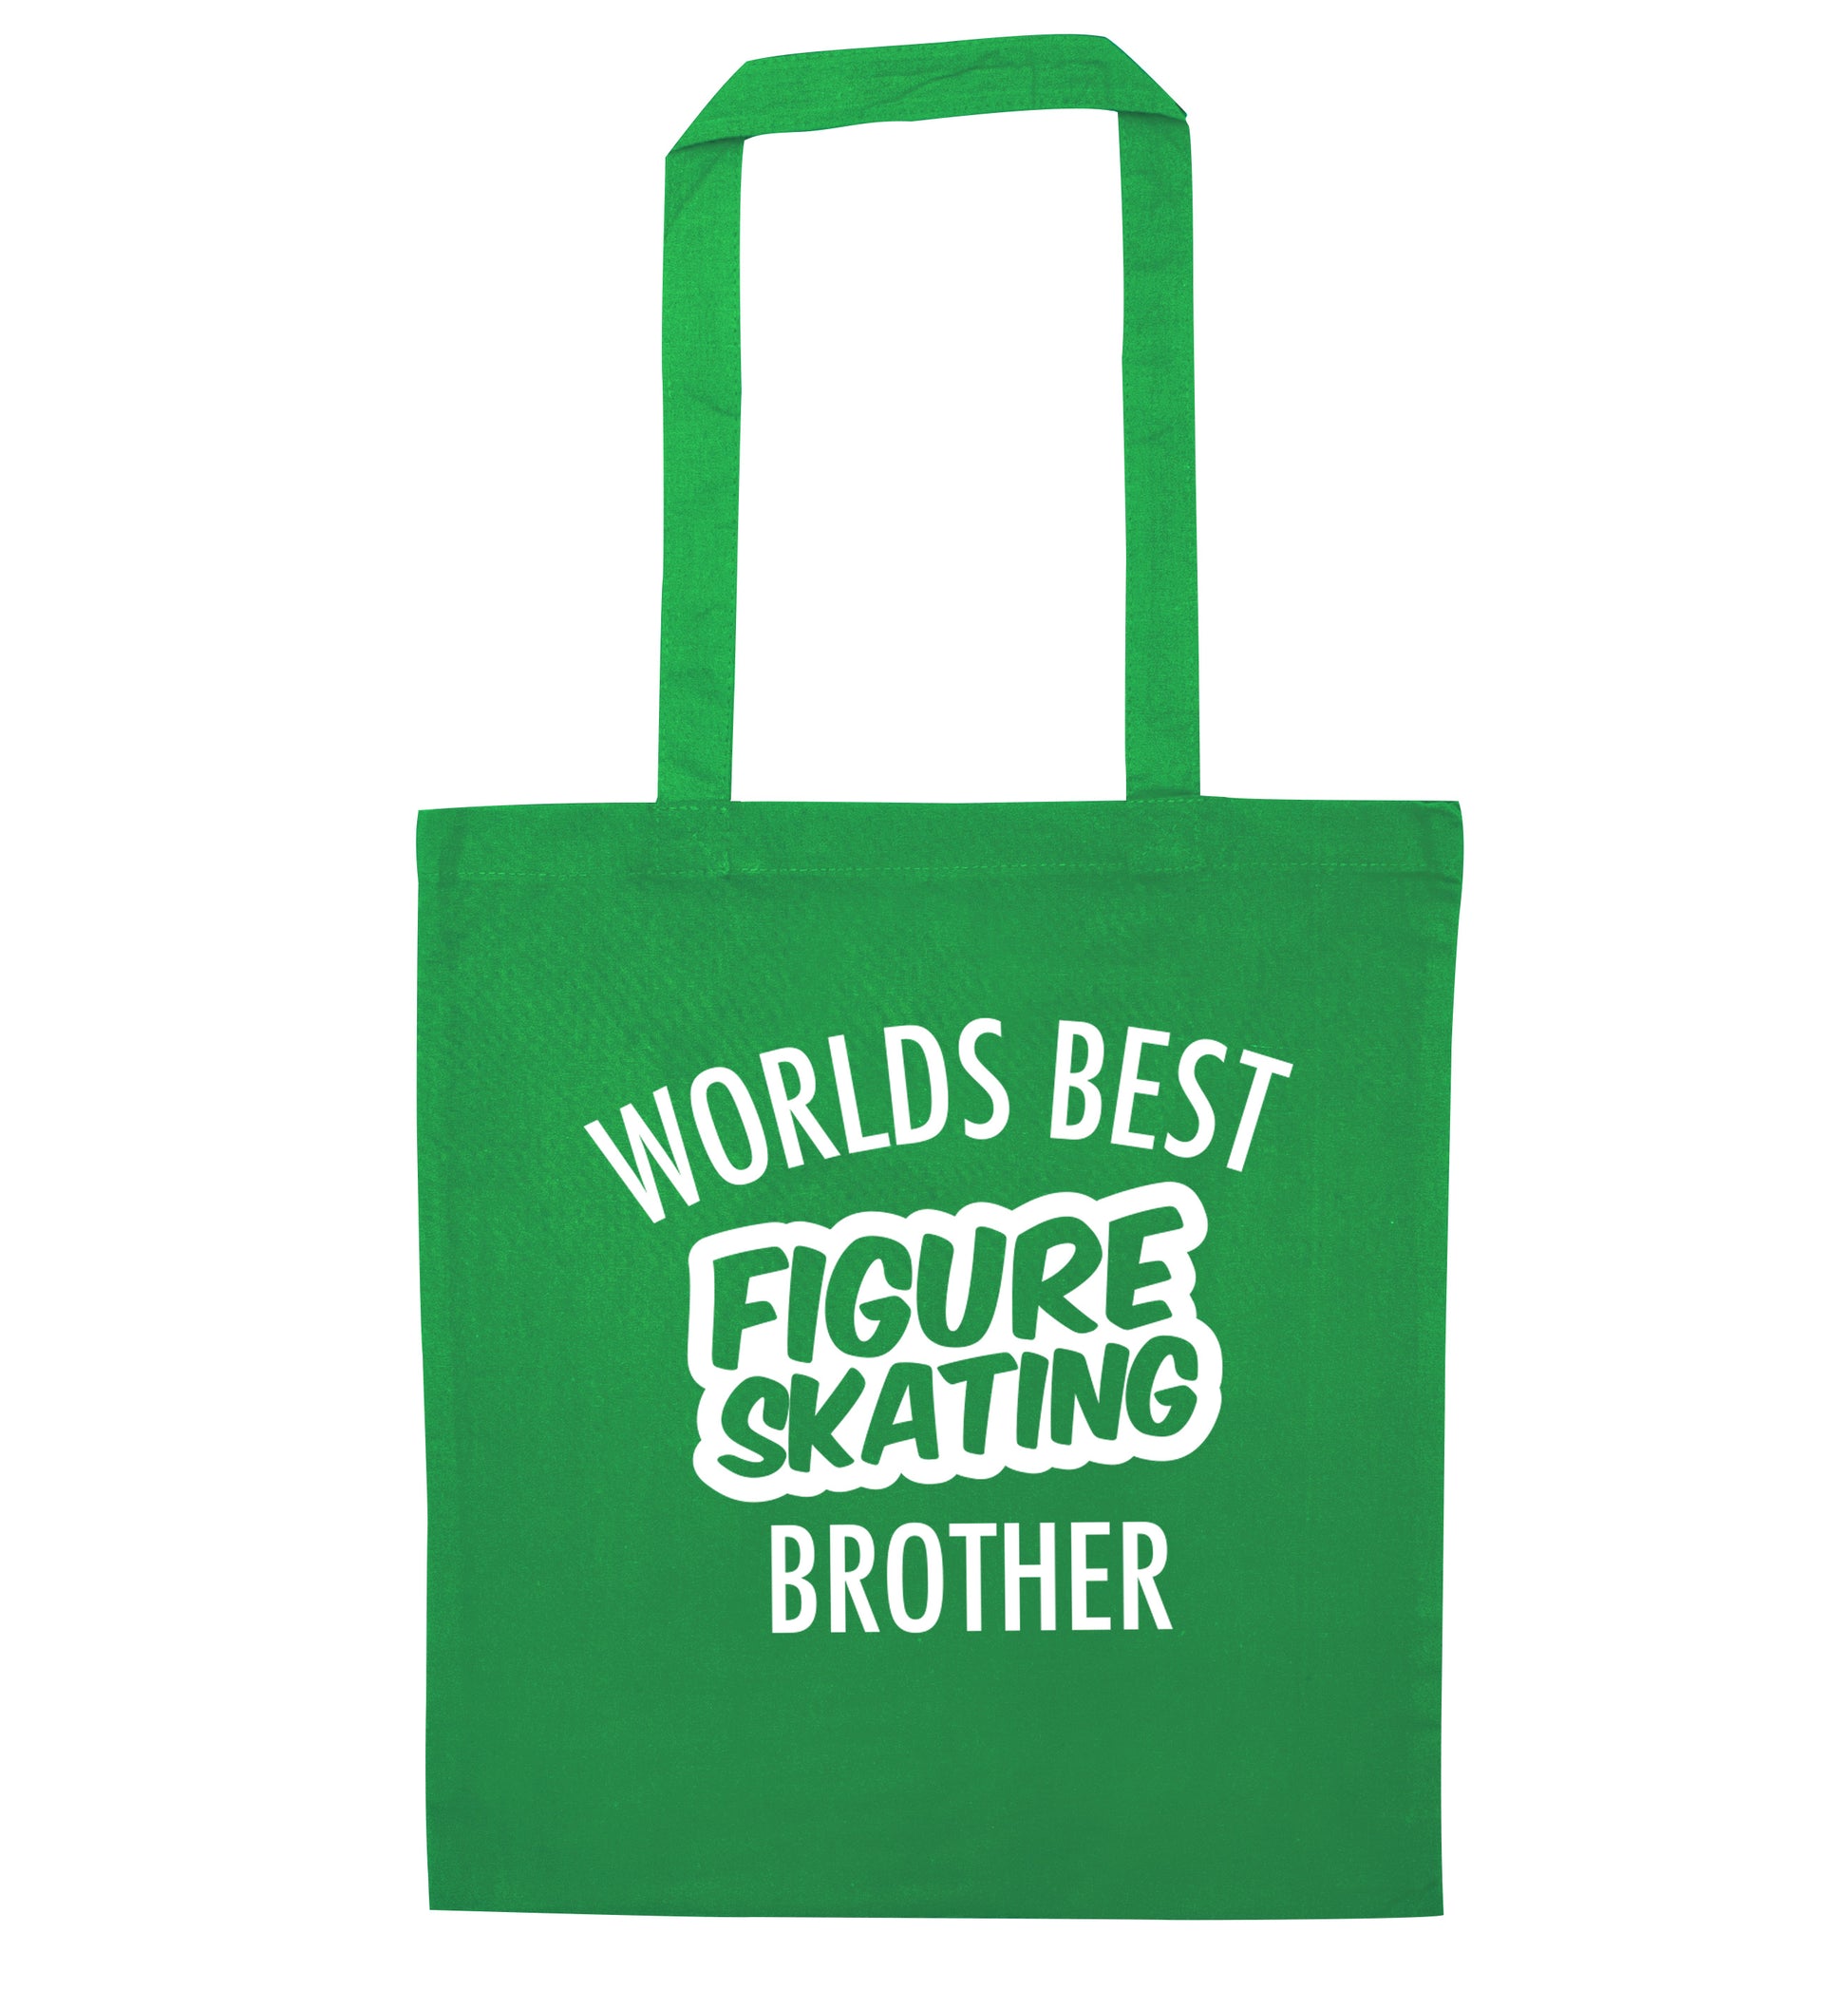 Worlds best figure skating brother green tote bag